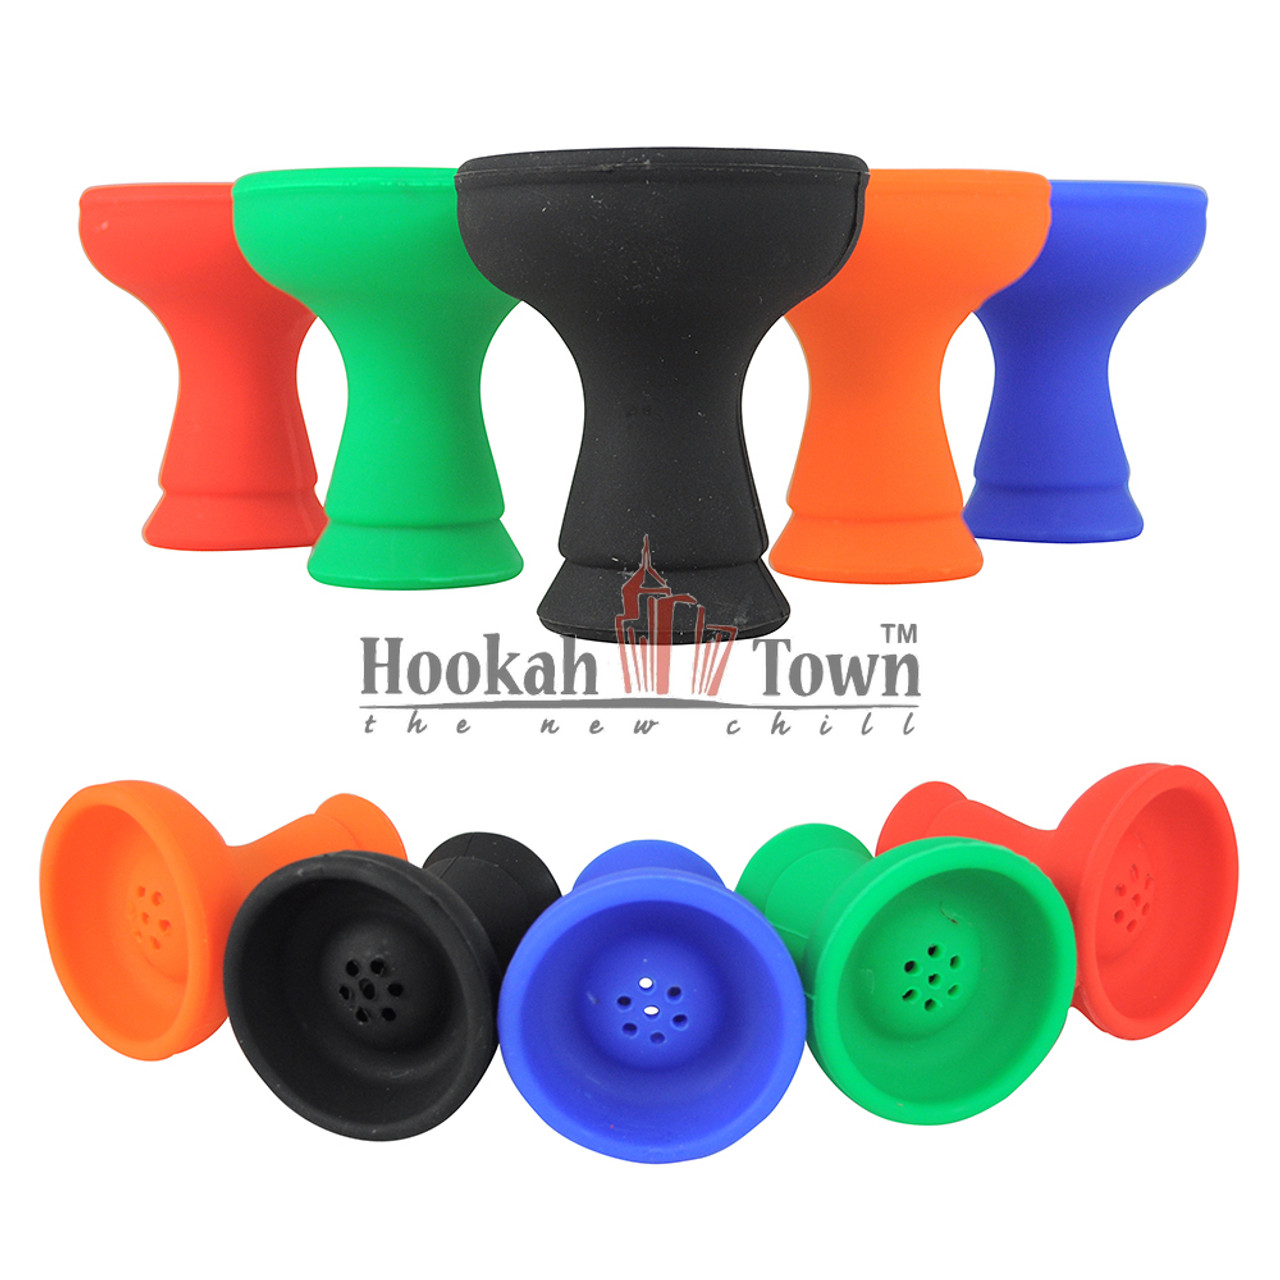 https://cdn11.bigcommerce.com/s-eyl6zzzo3/images/stencil/1280x1280/products/734/986/Rubber-Hookah-Bowl__11198.1534702150.jpg?c=2